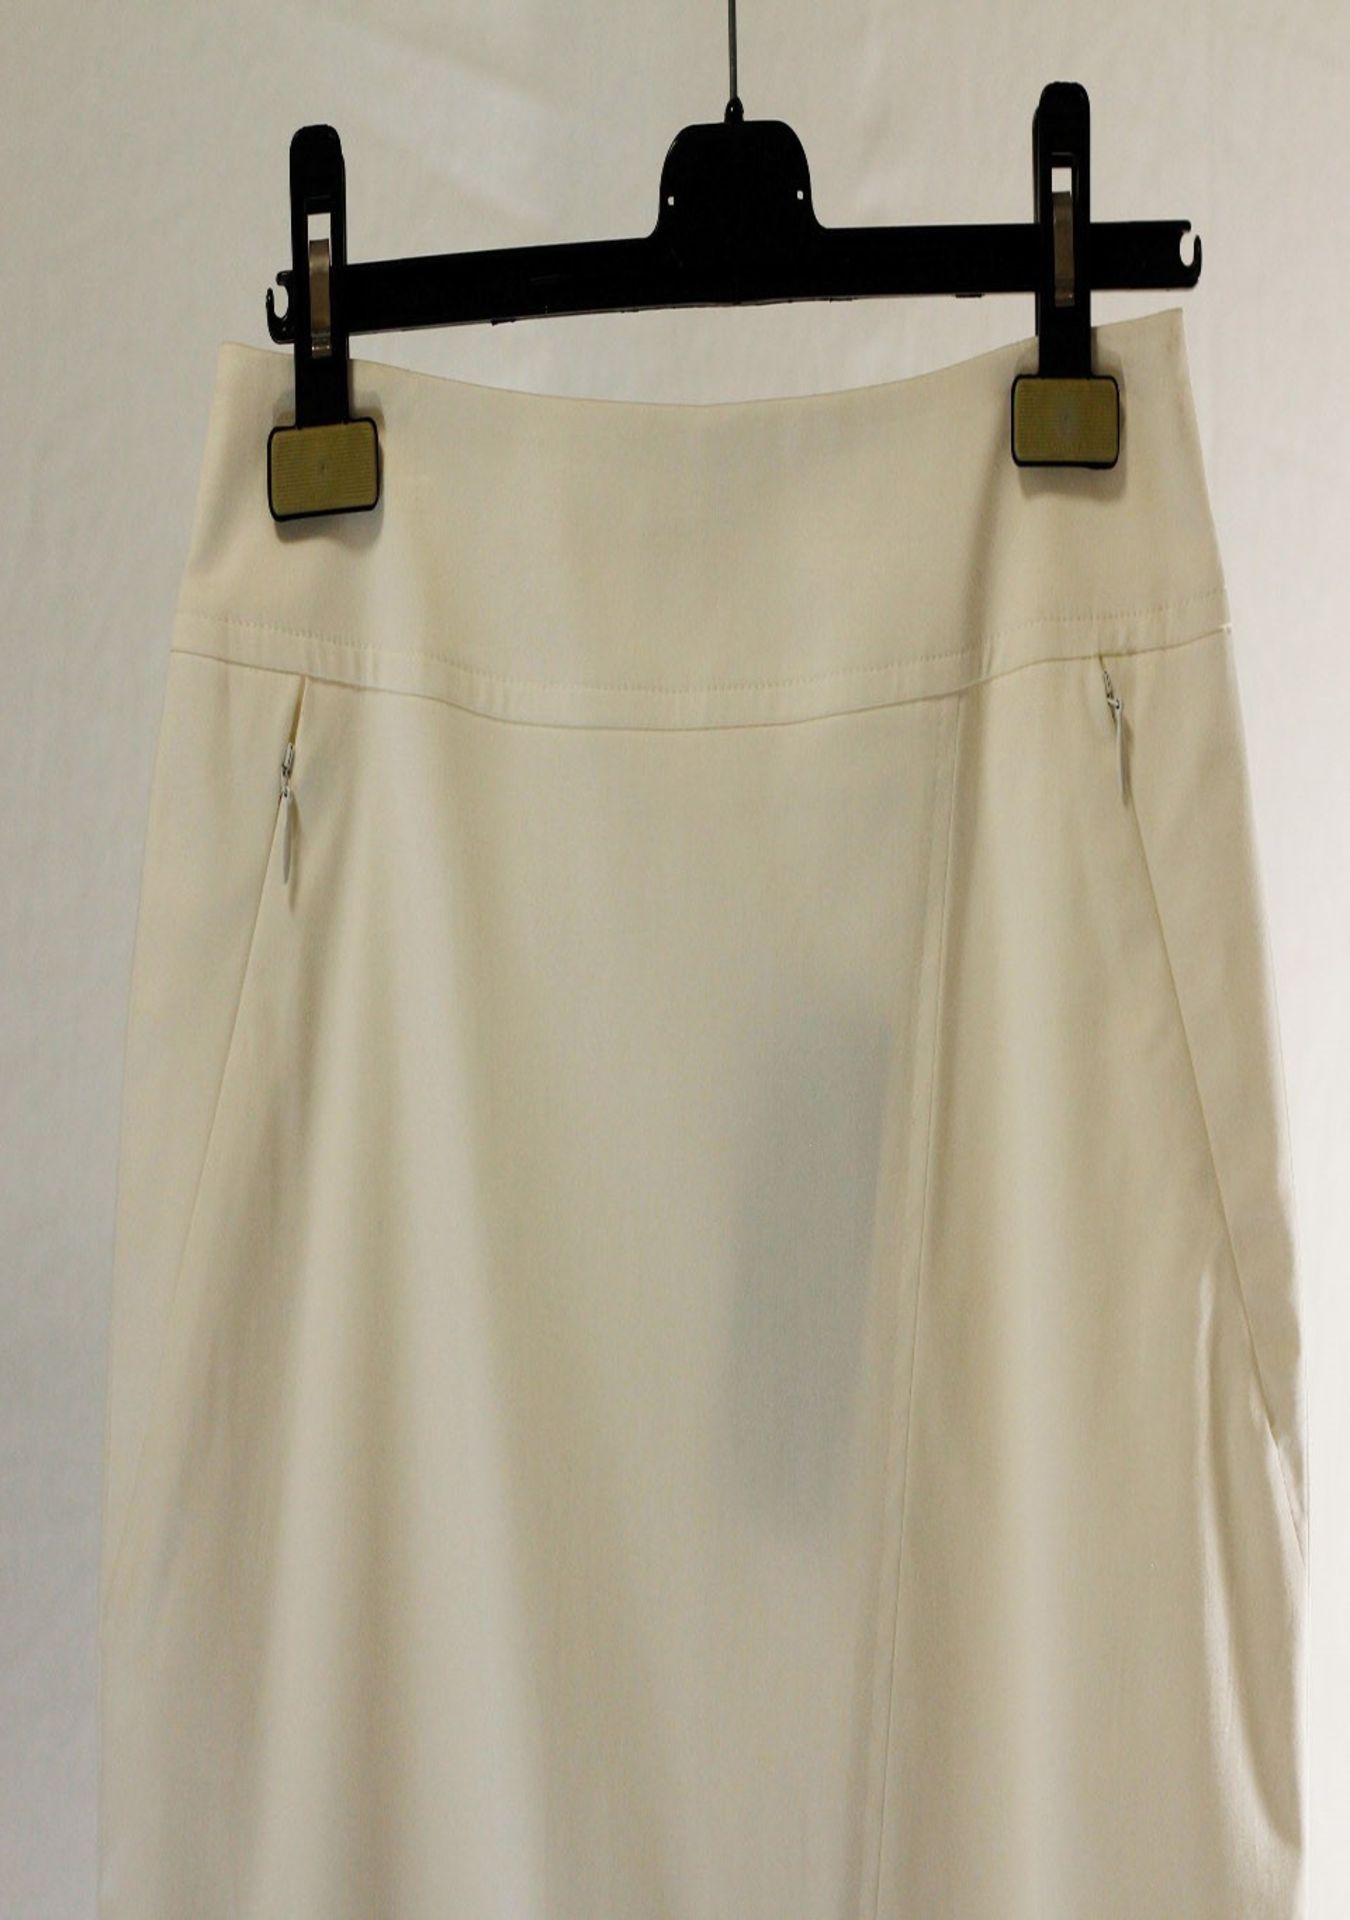 1 x Anne Belin White Skirt - Size: 14 - Material: 100% Cotton - From a High End Clothing Boutique In - Image 9 of 9